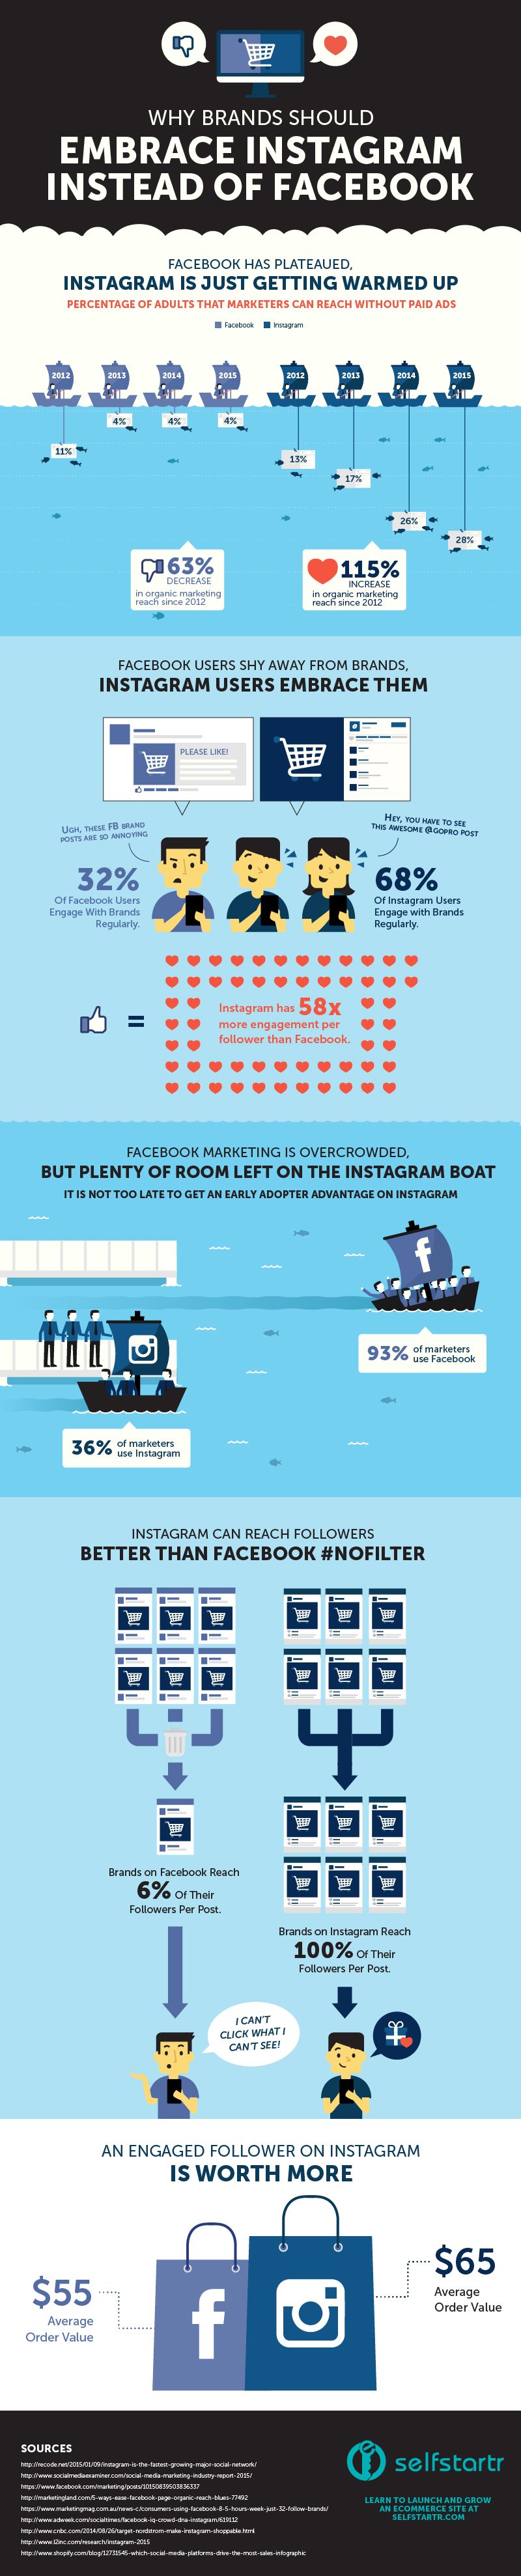 Why-Brands-Should-Embrace-Instagram-Instead-of-Facebook -INFOGRAPHIC-by-selfstartr